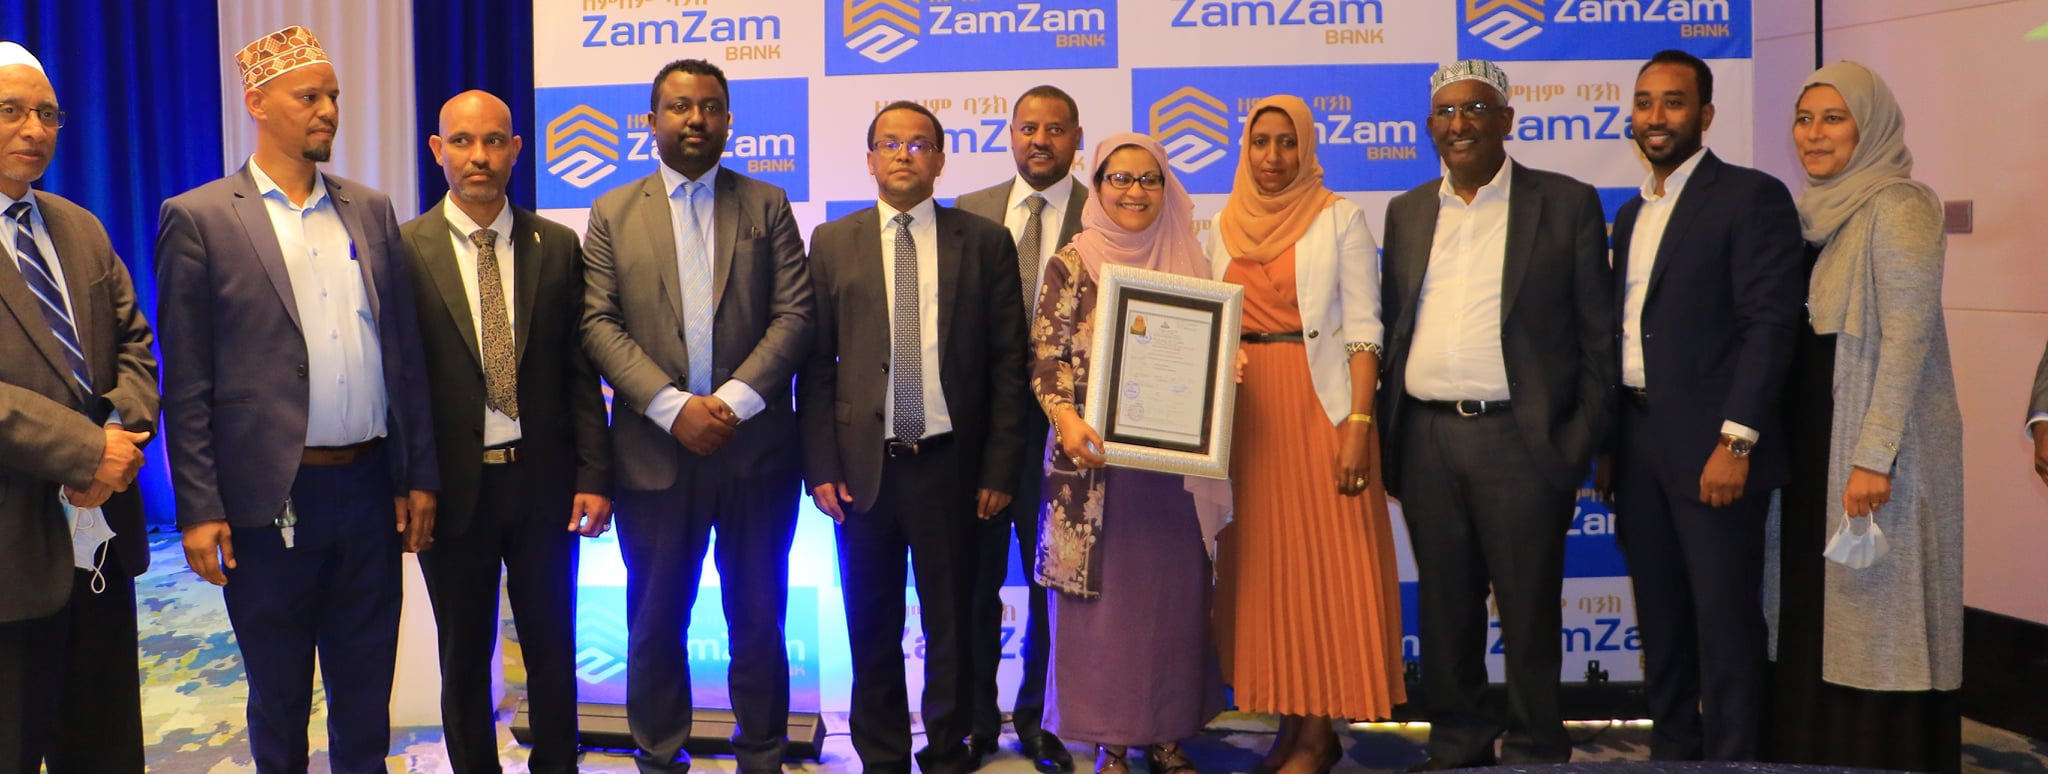 ZamZam Bank to Start Operation in 2021 as first Islamic Bank